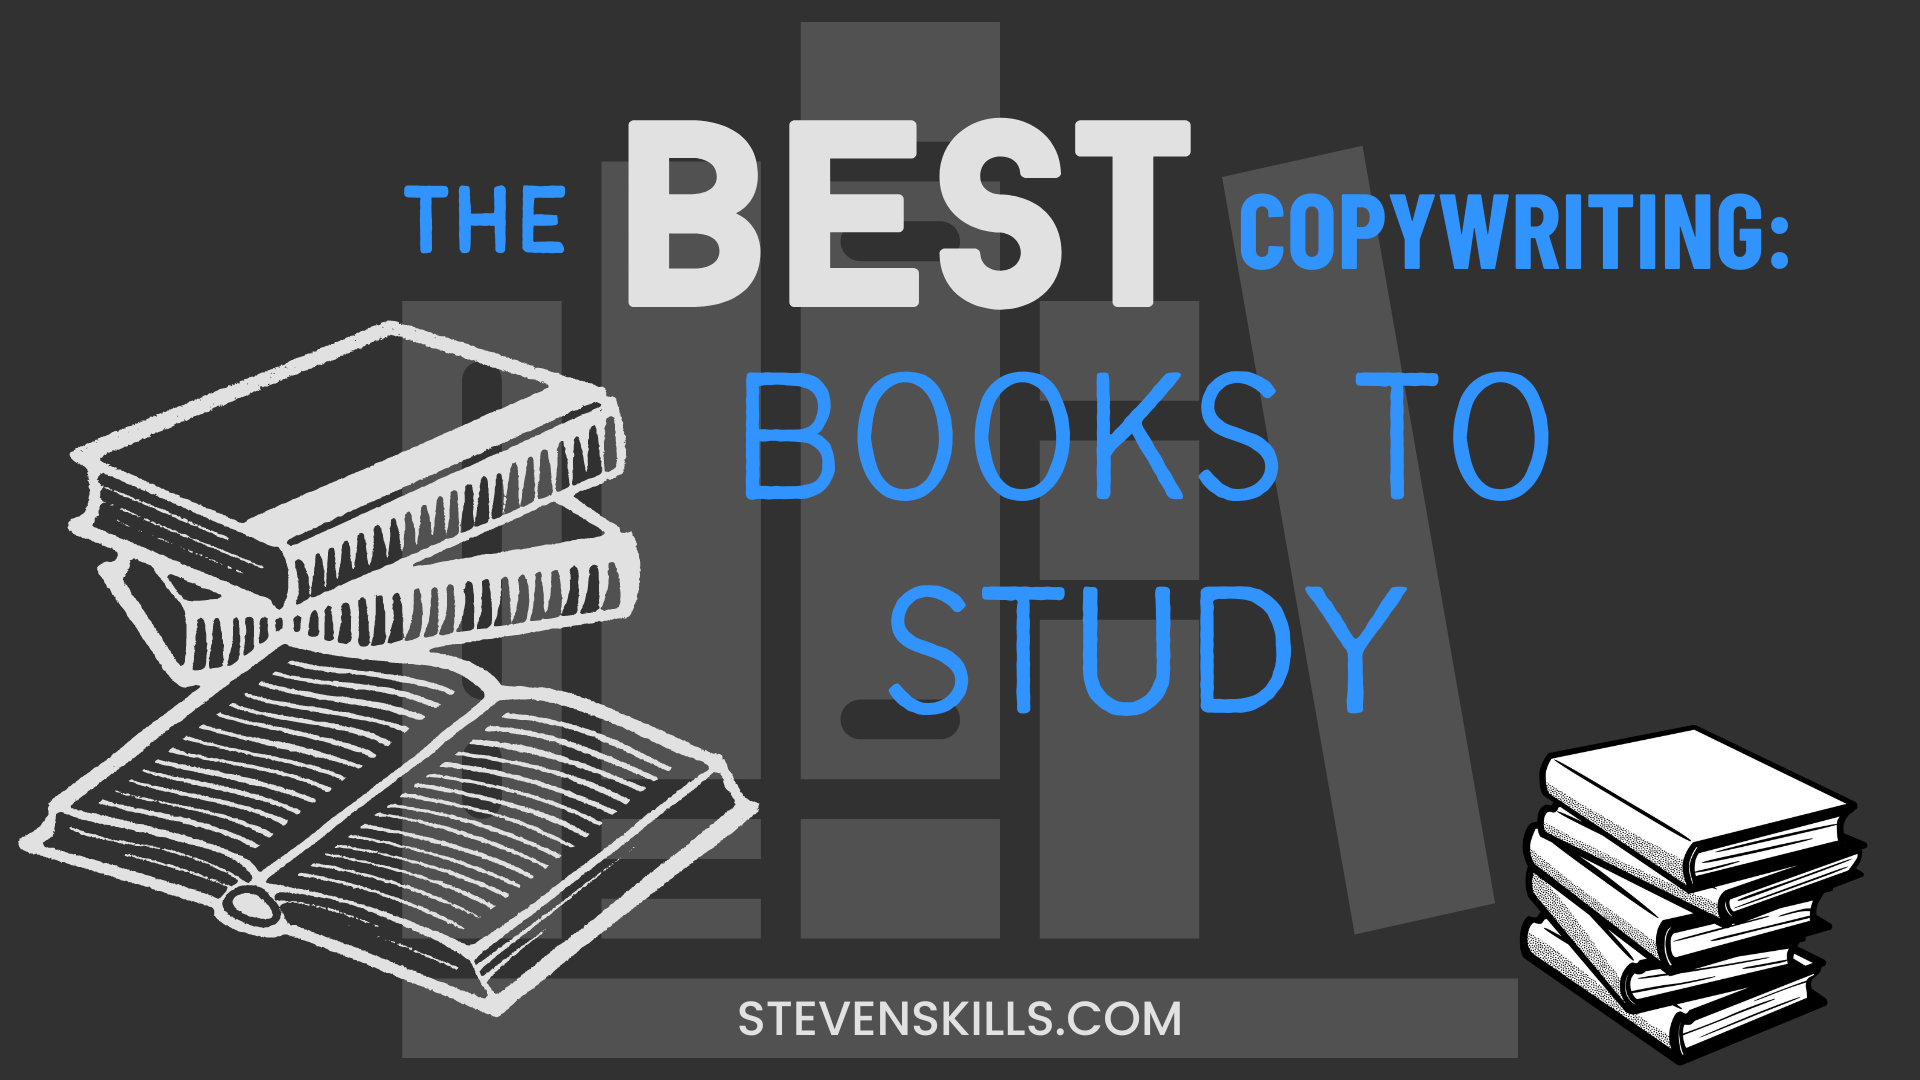 The Best Copywriting Book to Study